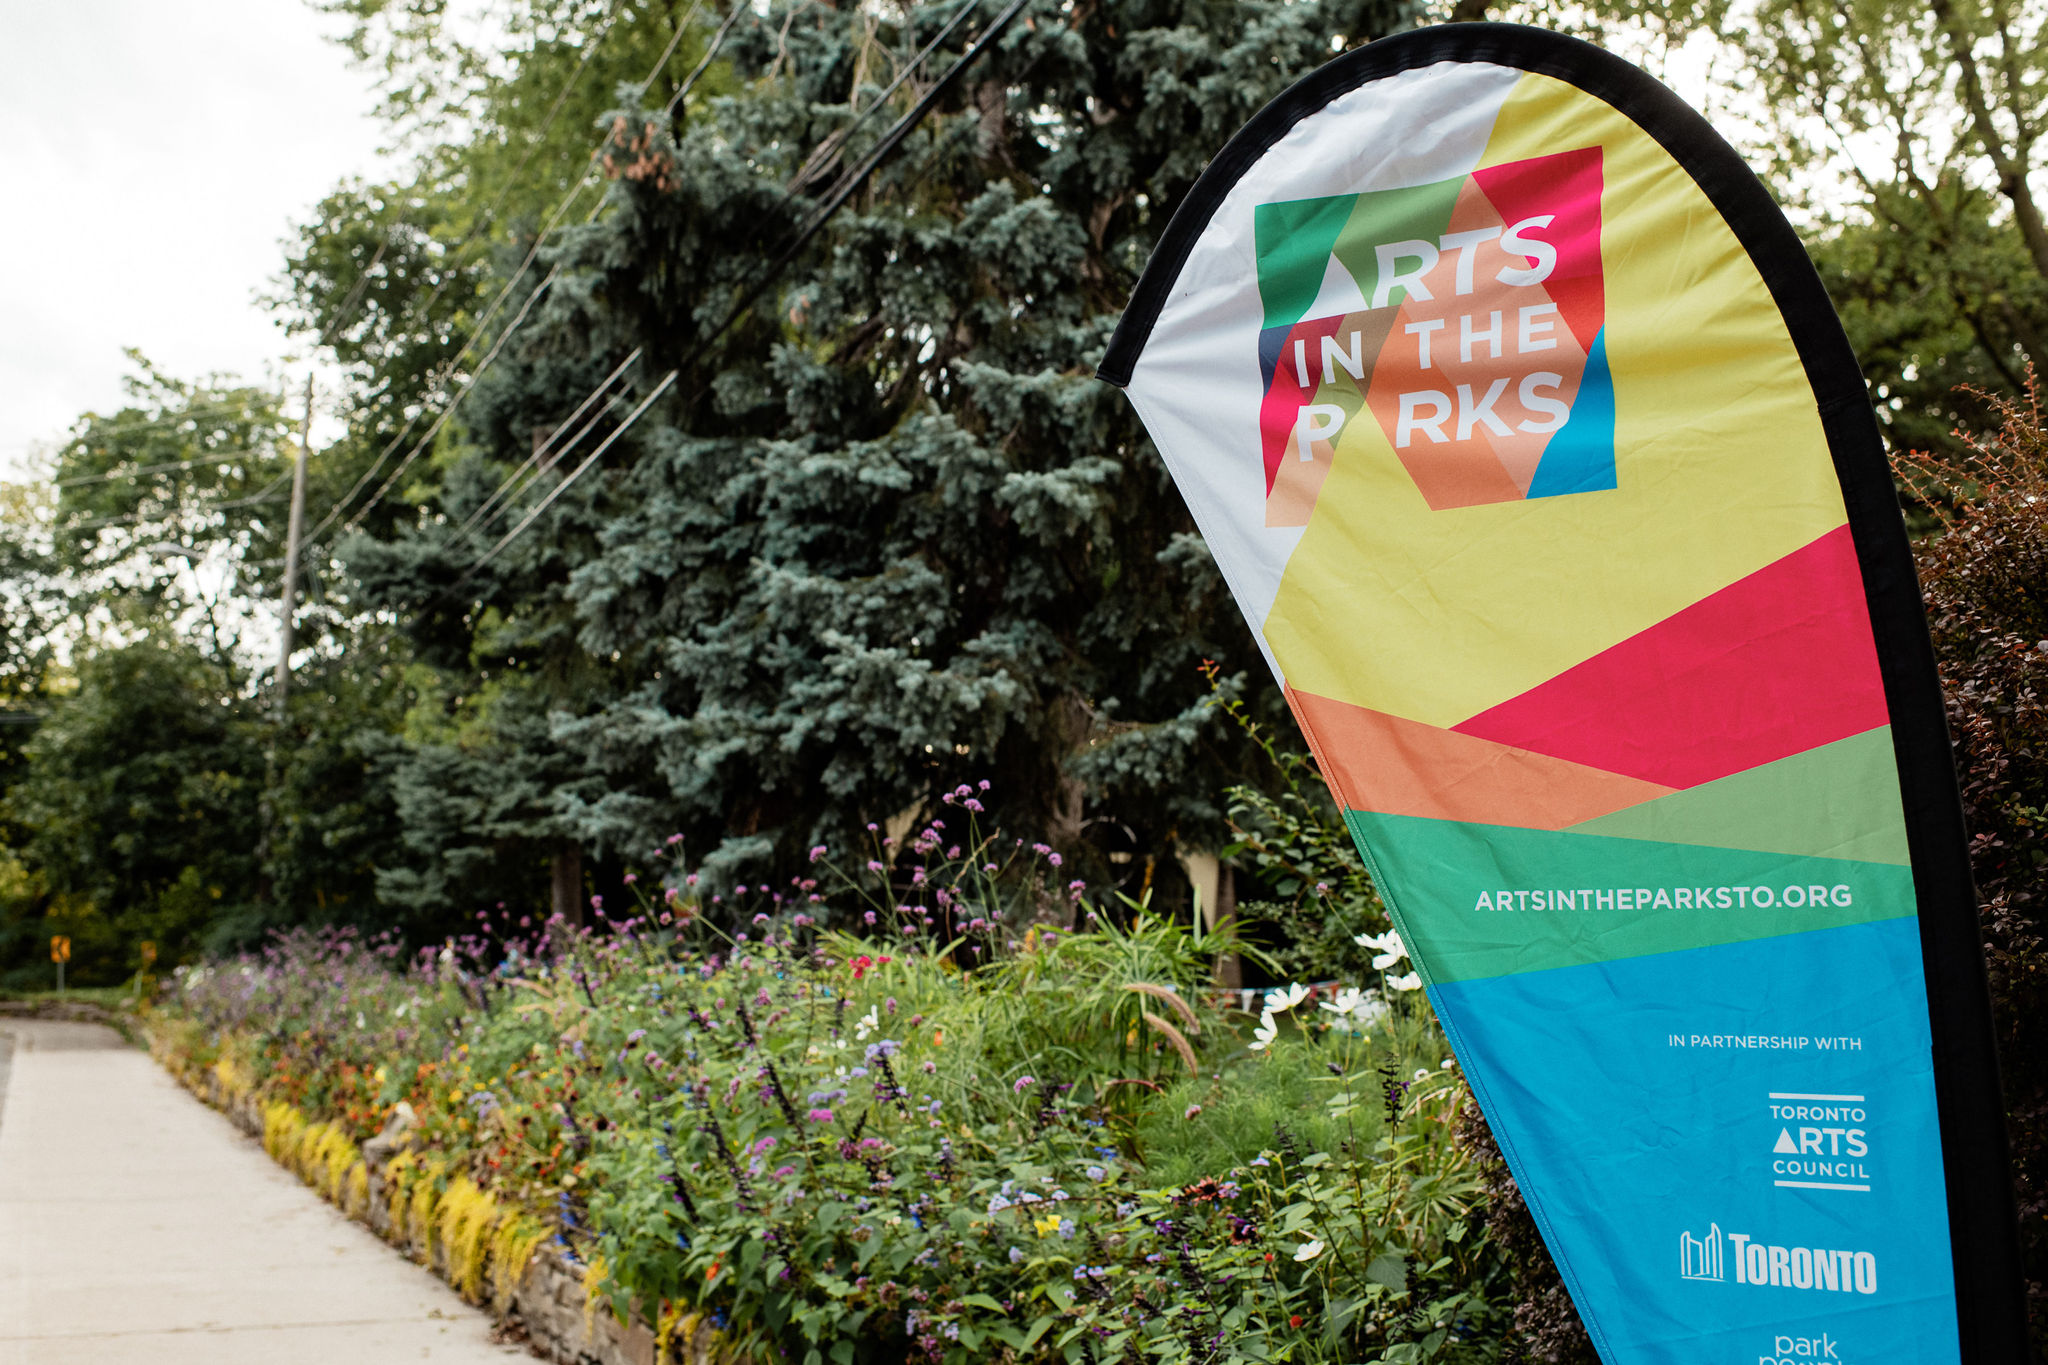 A multicoloured flag that says "Arts in the Parks" stands in front of a wildflower garden and sidwalk.